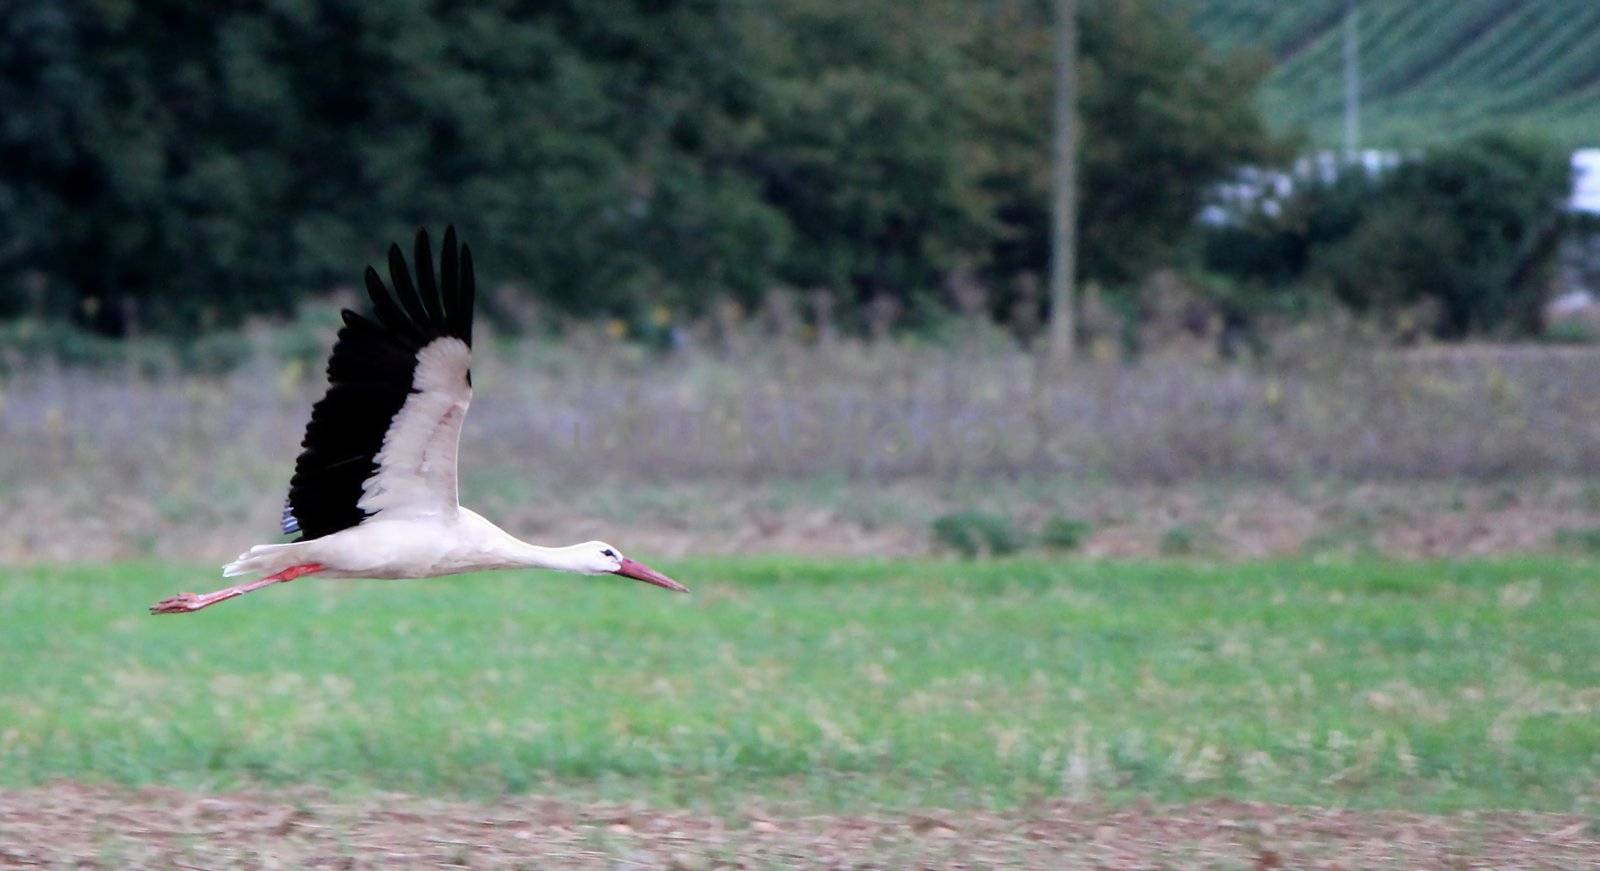 Migrating black and white stork flying upon a field